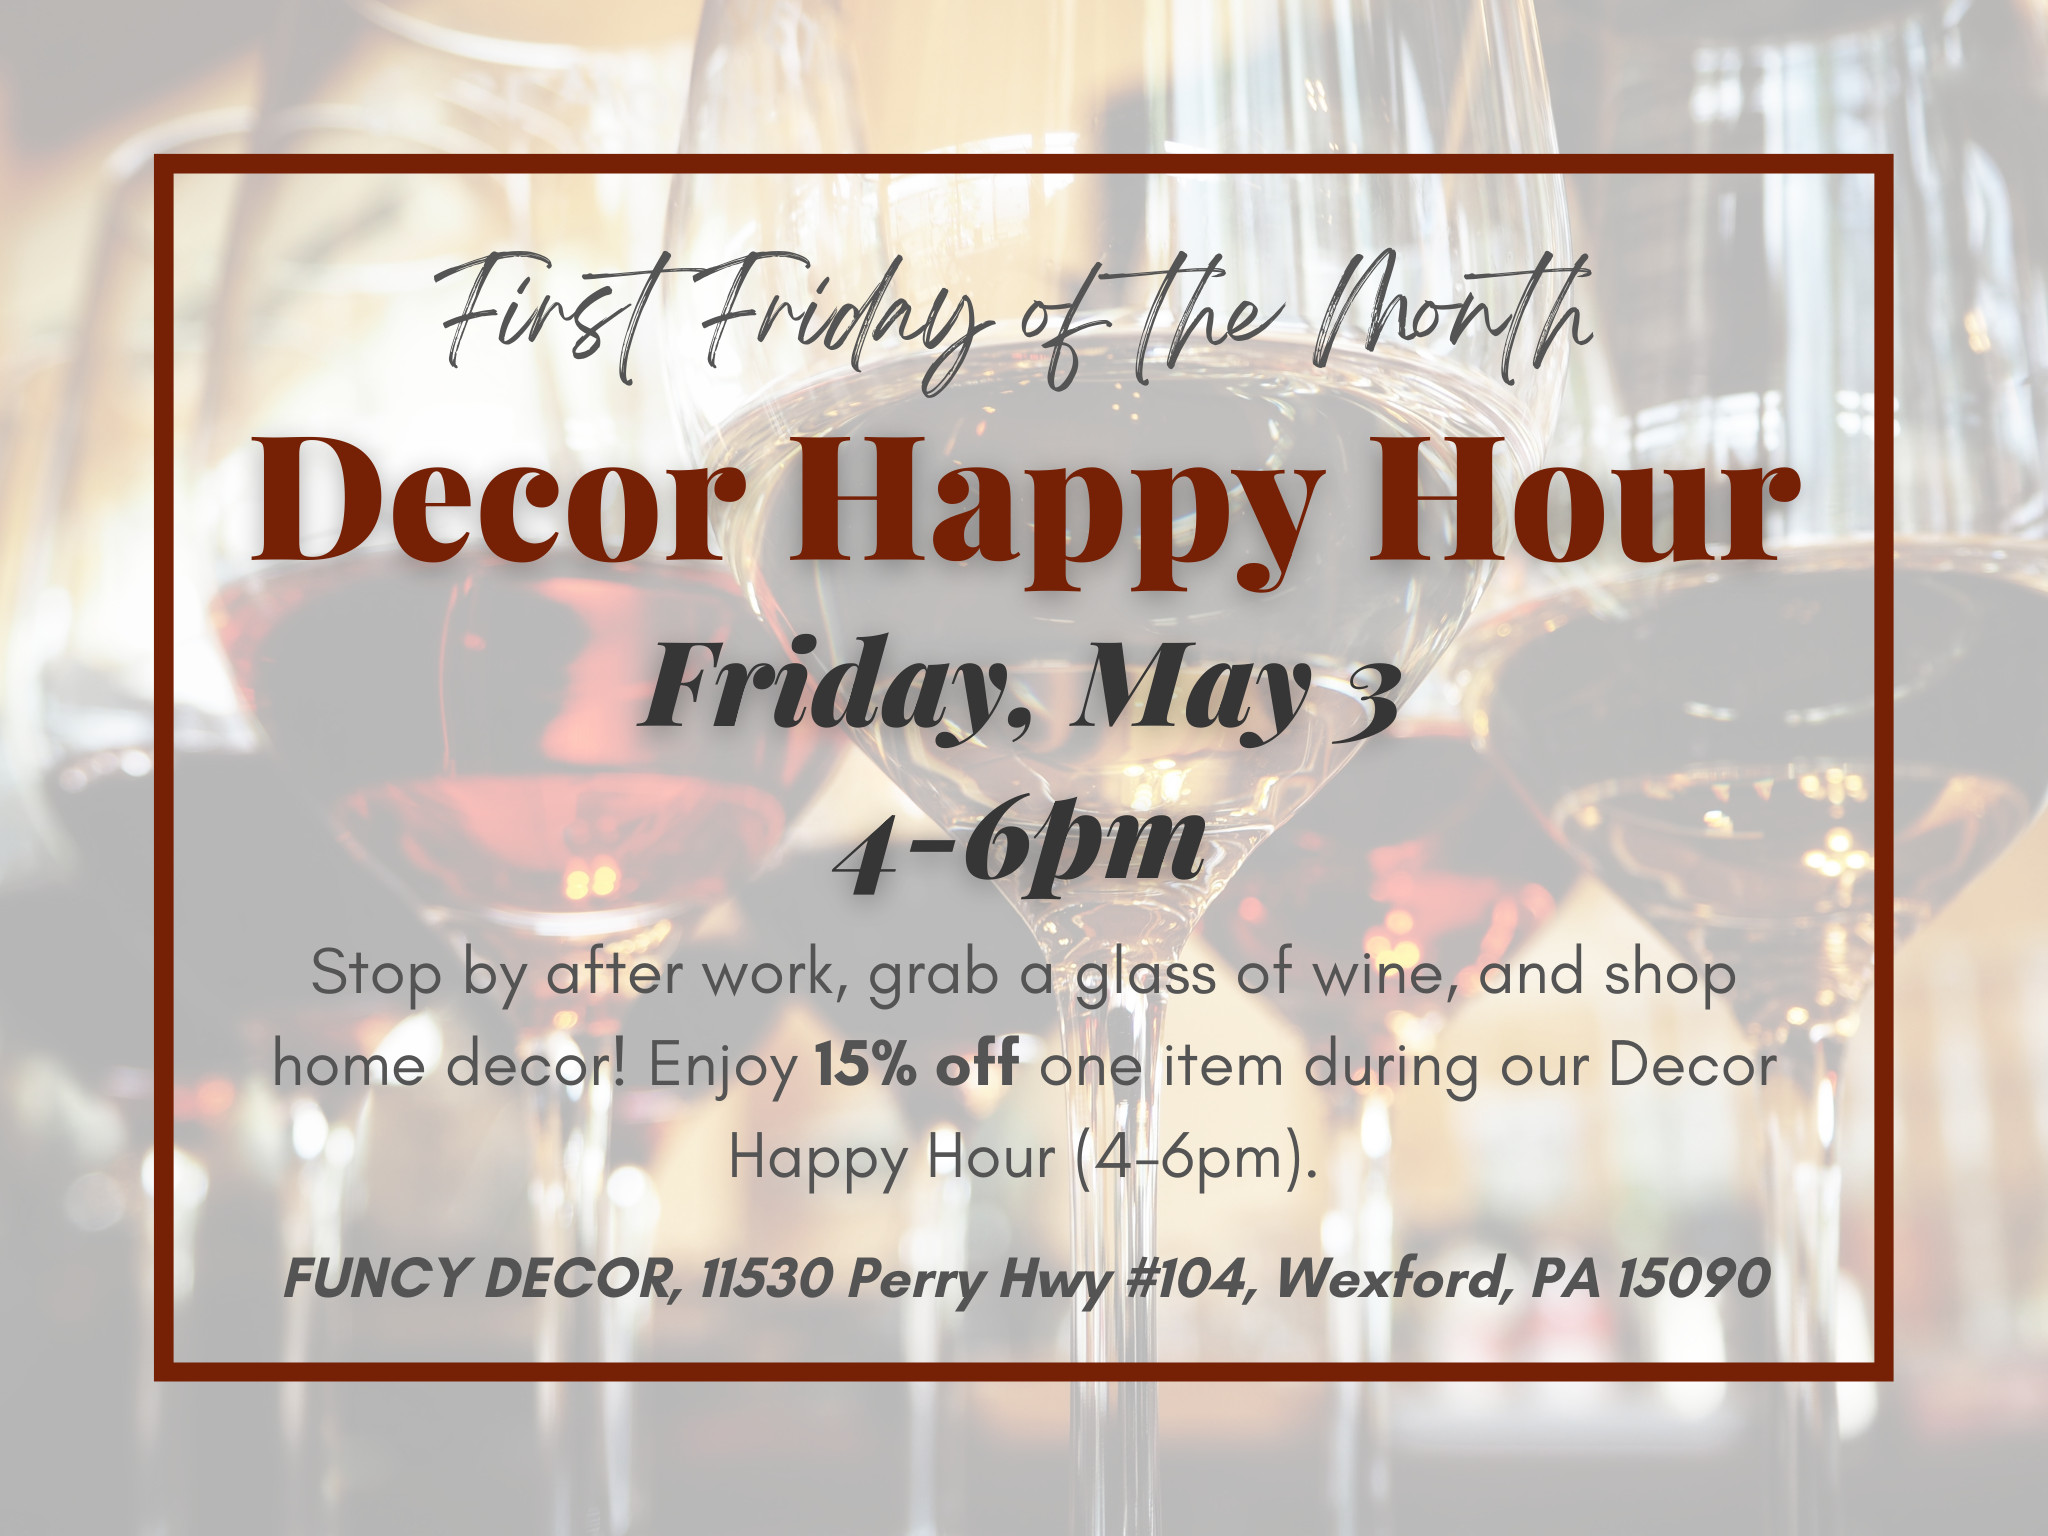 First Friday of the Month Decor Happy Hour at Funcy Decor